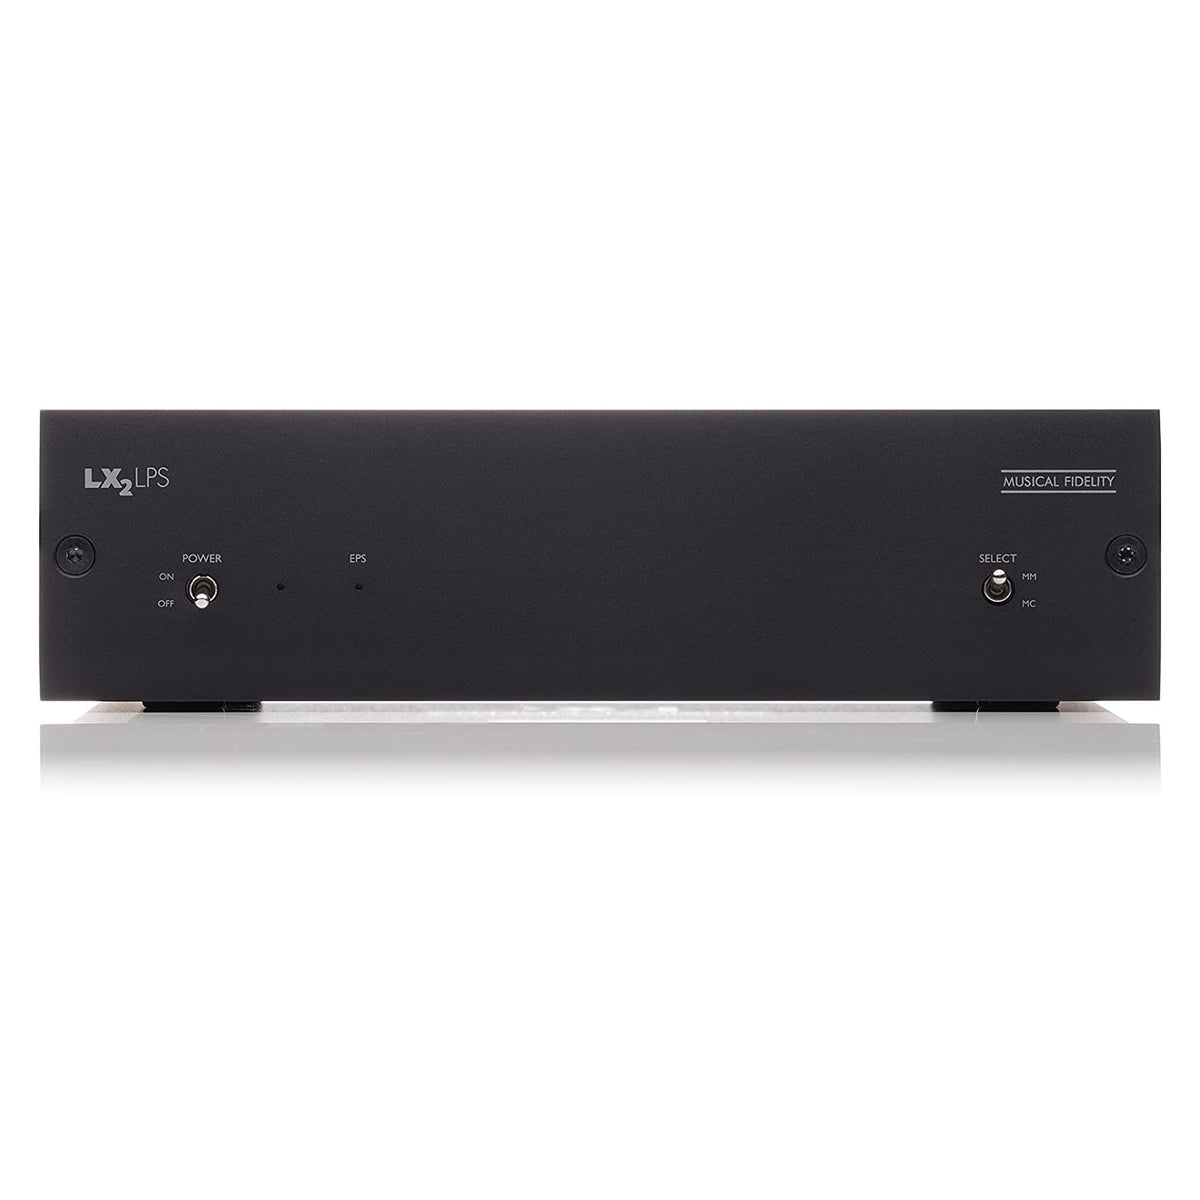 Musical Fidelity LX2-LPS MM/MC Phono Preamp